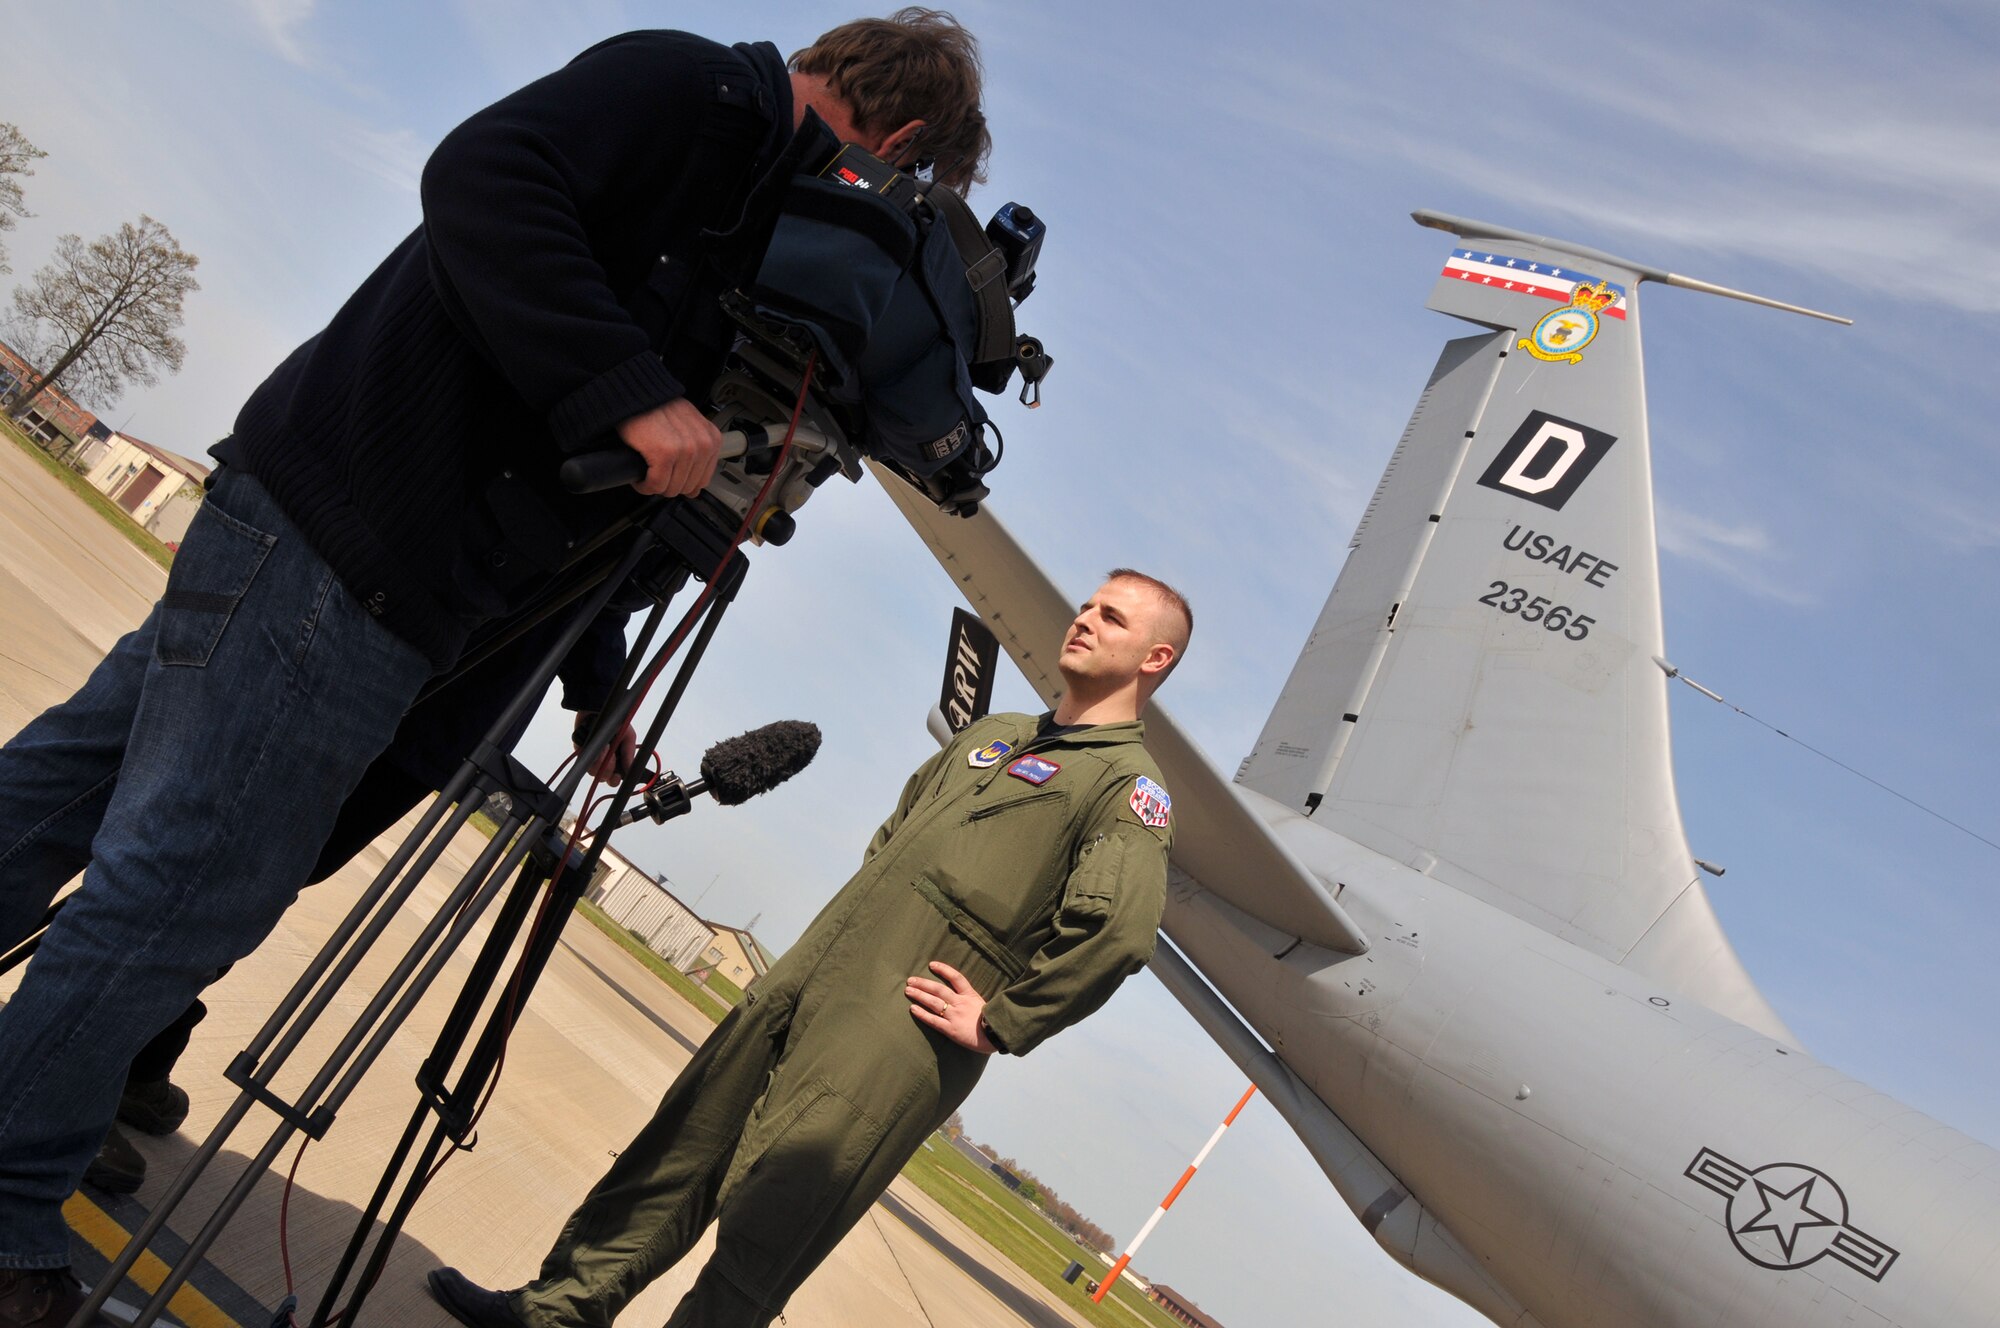 RAF MILDENHALL, England - Senior Airman Neil Patras, 351st Air Refueling Squadron boom operator, is interviewed by a local television crew here after flying them during a real-world air-to-air refueling mission over the coast of England April 27. In addition to supporting 100th Air Refueling Wing and 48th Fighter Wing training requirements, this mission also supported the 100th ARW Public Affairs Media Flight Program which allows reporters to get a detailed look at the heart of the base mission and enable them to make balanced decisions in the course of their community work. (U.S. Air Force photo/Tech. Sgt. Kevin Wallace)